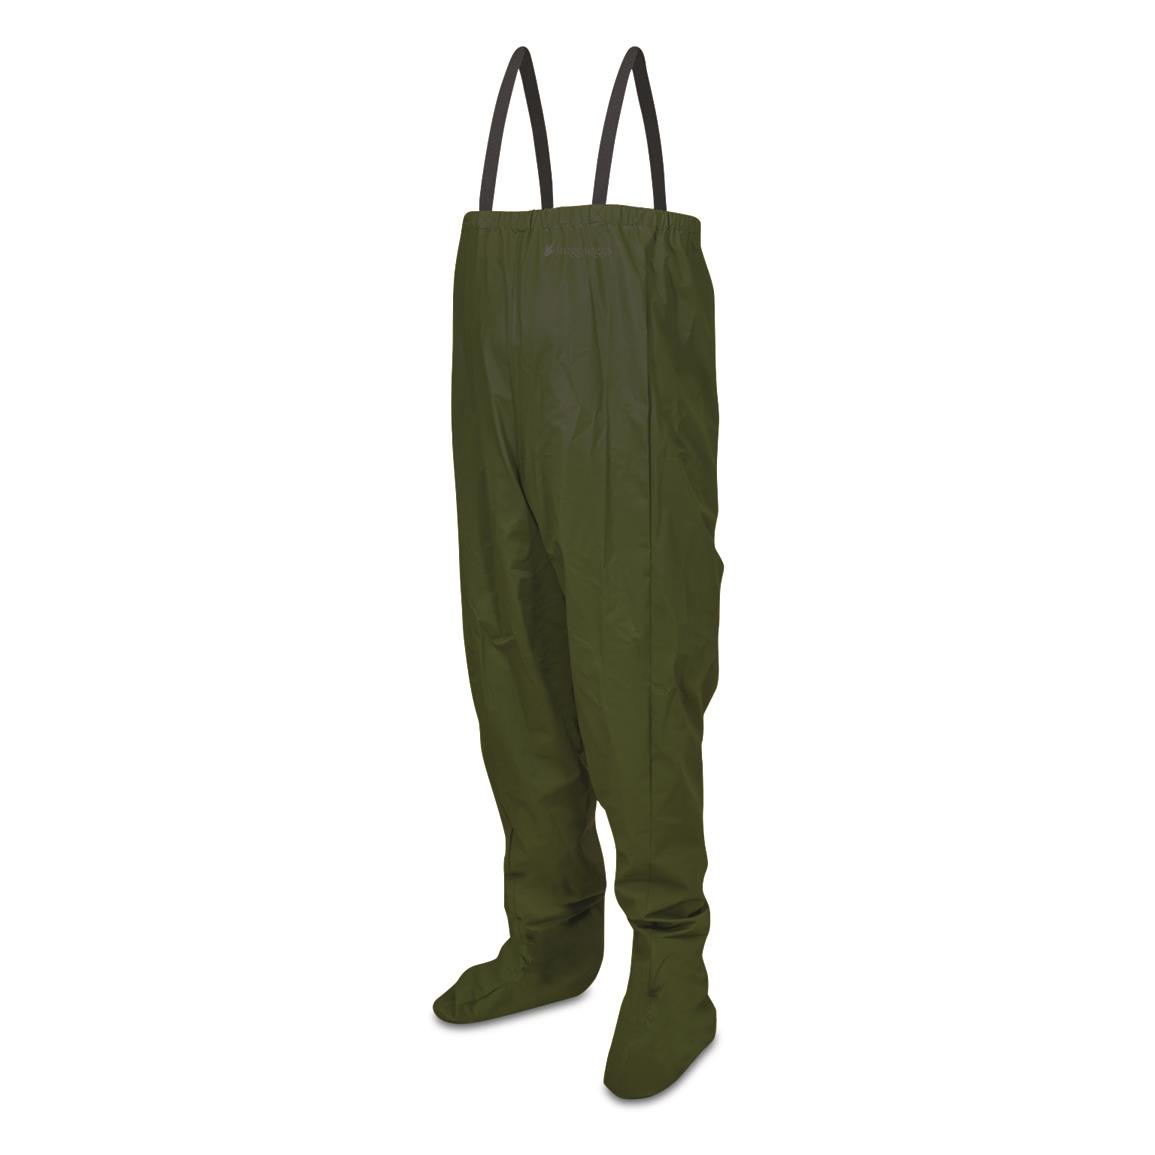 Frogg Toggs Rana Emergency PVC Stockingfoot Chest Waders, Forest Green